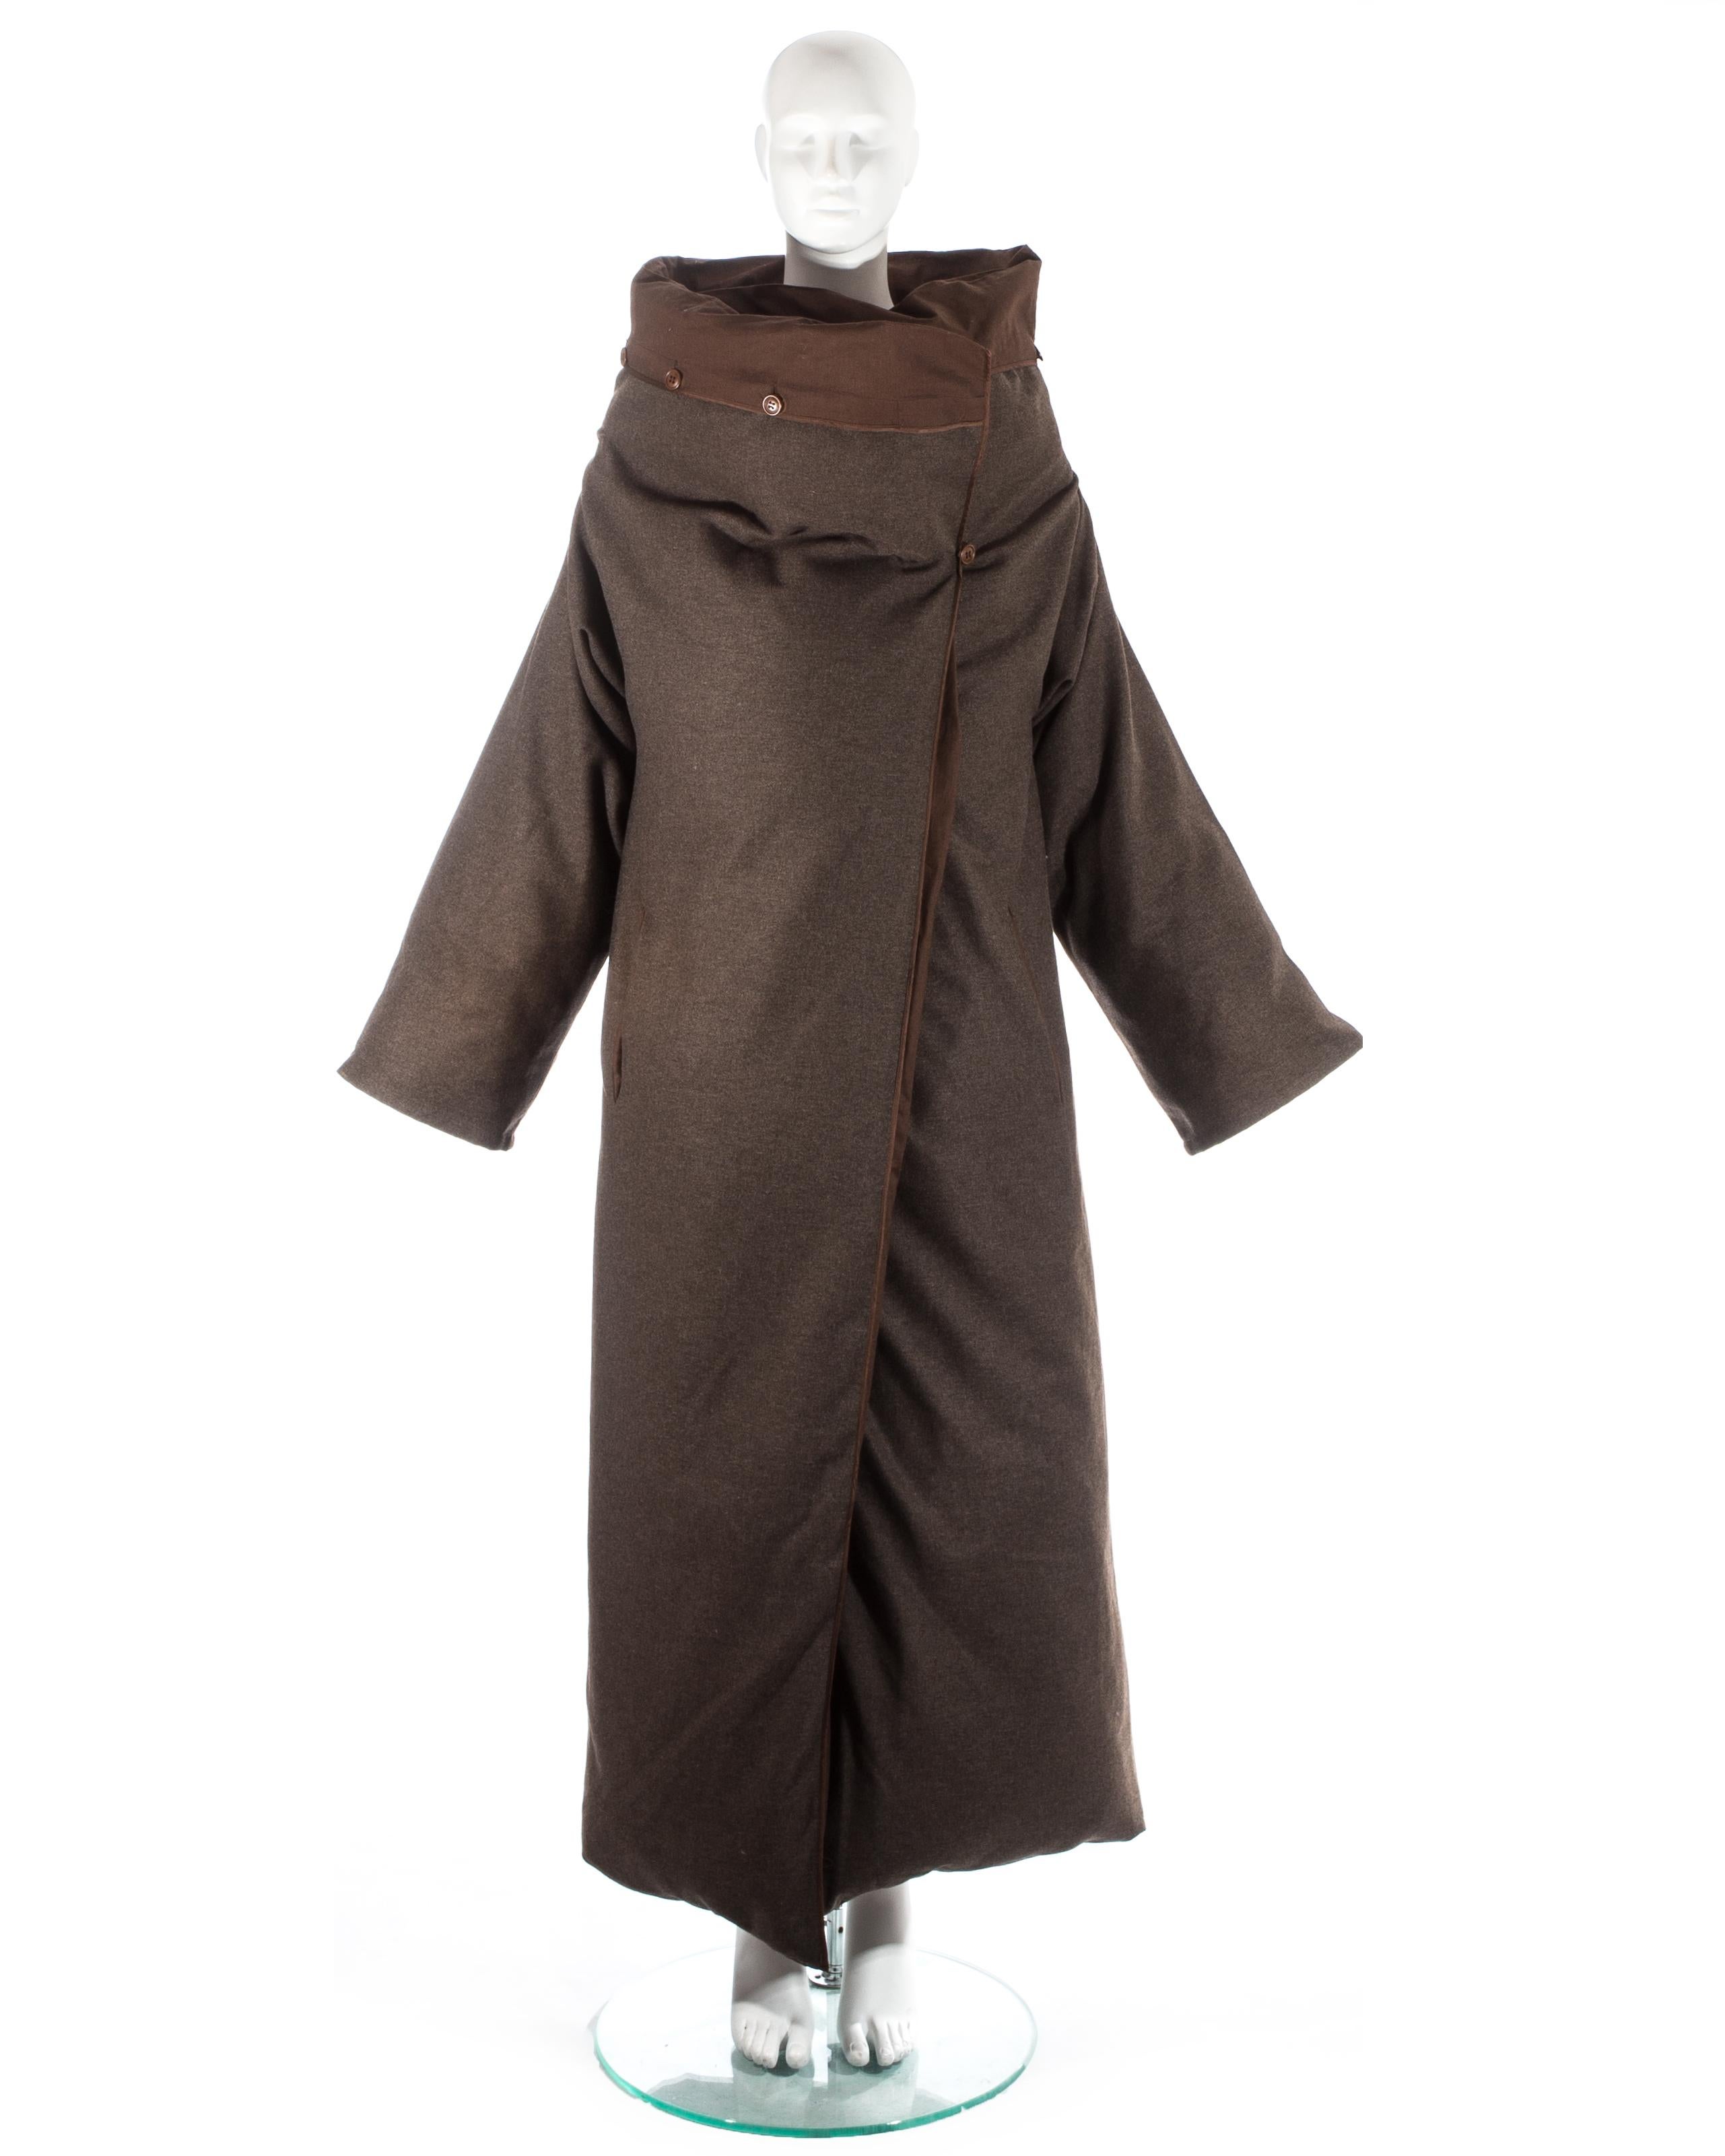 Martin Margiela; 'Duvet' coat made from a Featherlite 100% down filled duvet. Sleeves can be detached with zip closures around arm holes, 2 front pockets and sold with an additional brown wool duvet cover.

Fall-Winter 1999